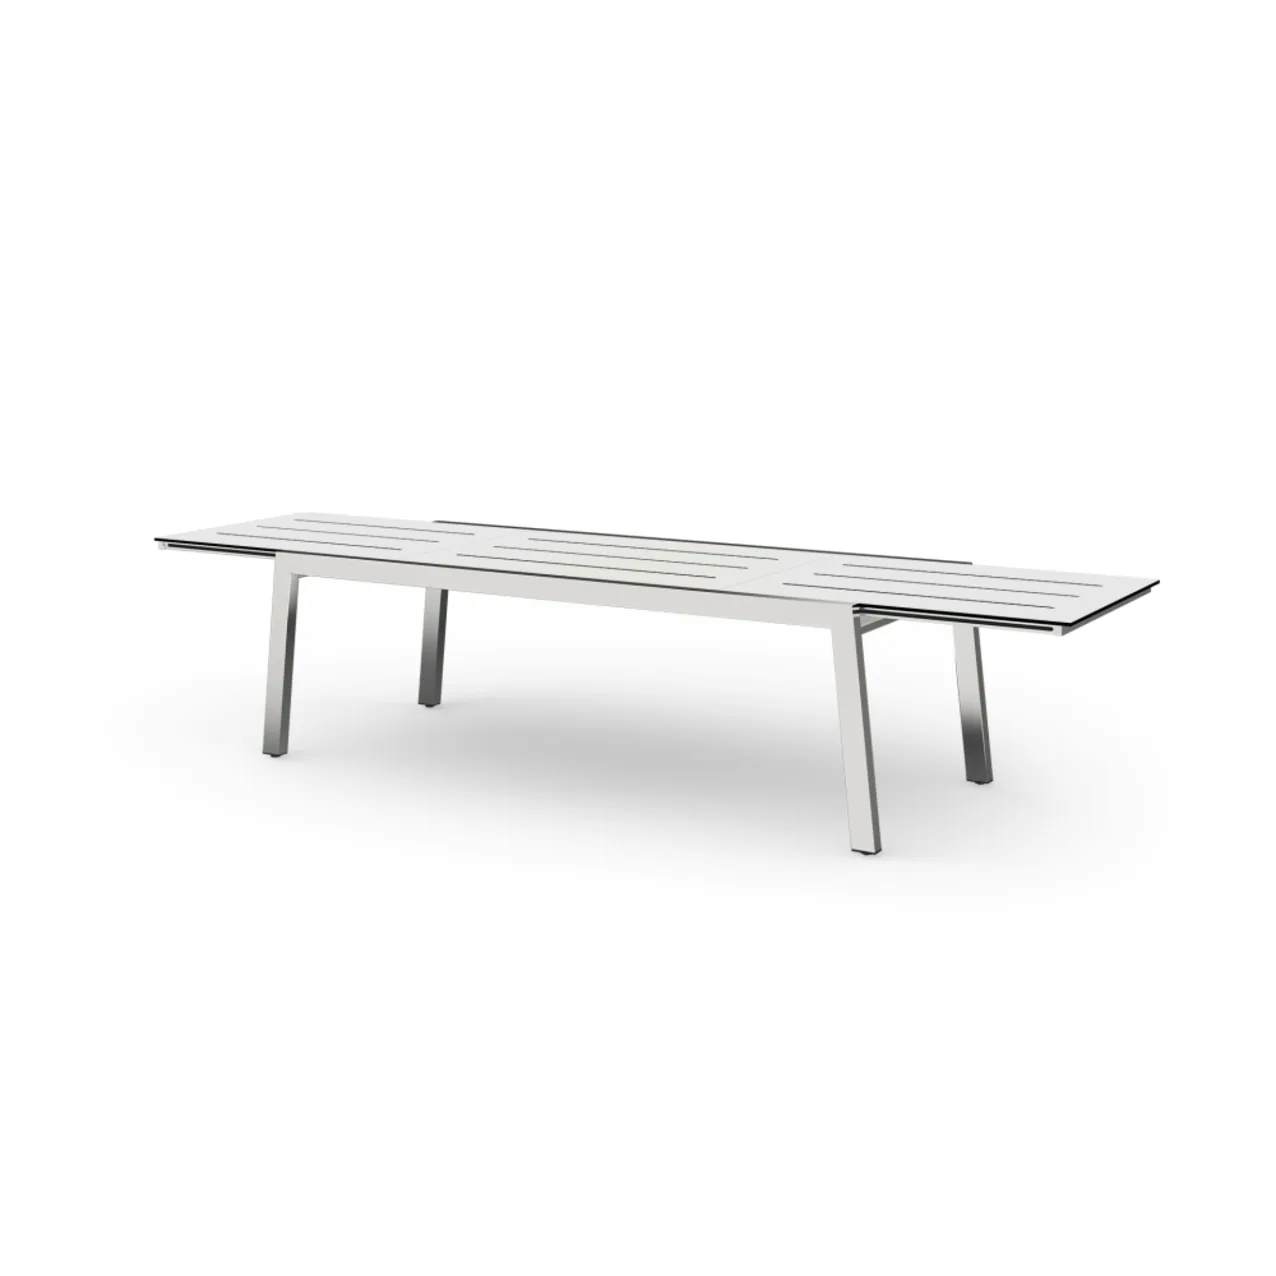 MAMAGREEN Baia 90.5"-141.5" Ext. Table | Frame: Stainless Steel | Tabletop: HPL, Alpes White